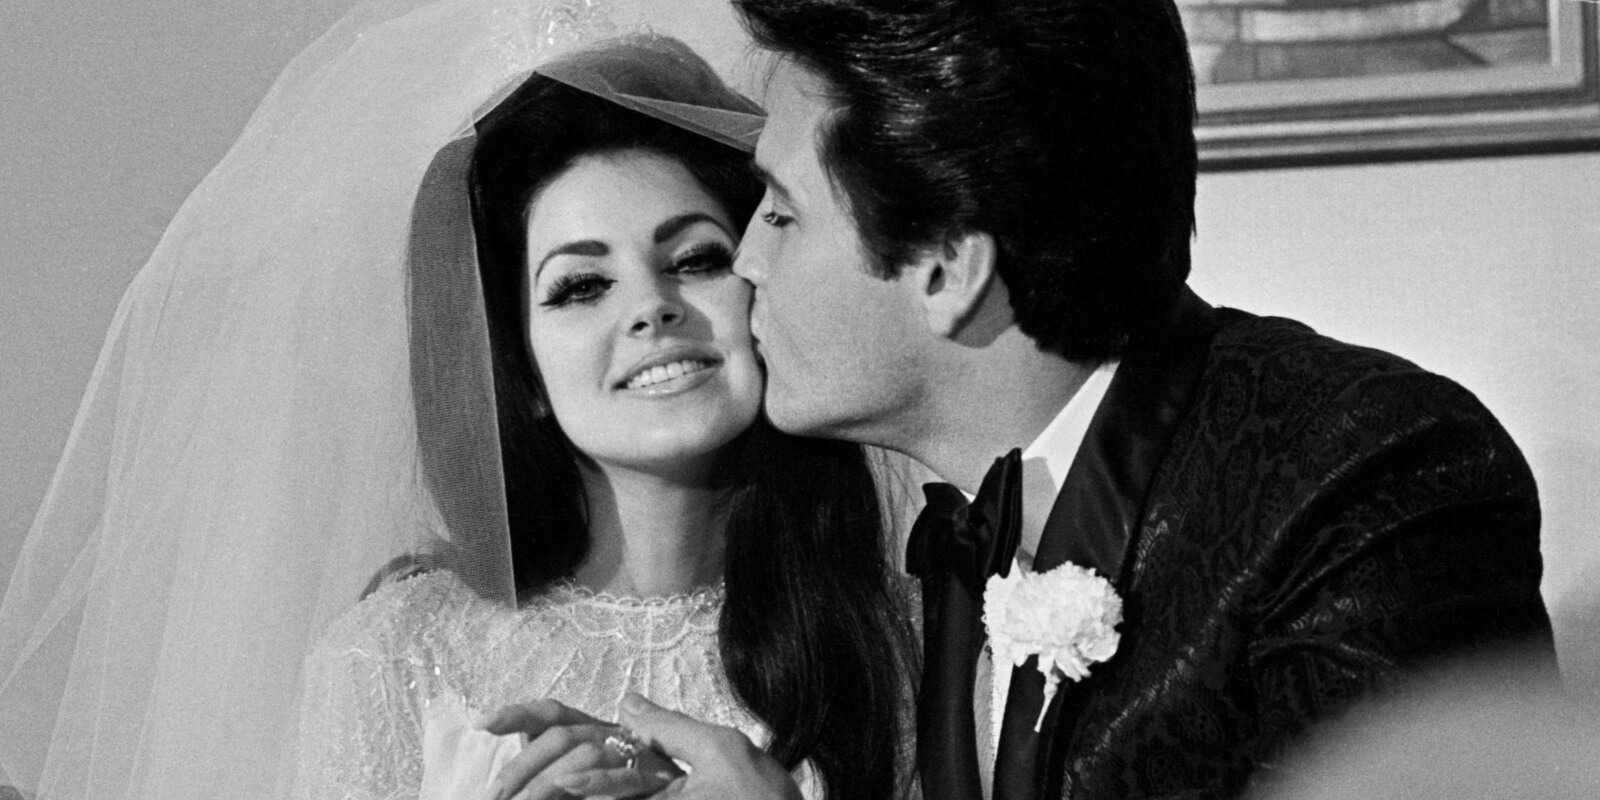 You are currently viewing Priscilla Presley and Elvis Presley Used ‘Baby Talk’ to Communicate: ‘You Have to Have Your Own Language’